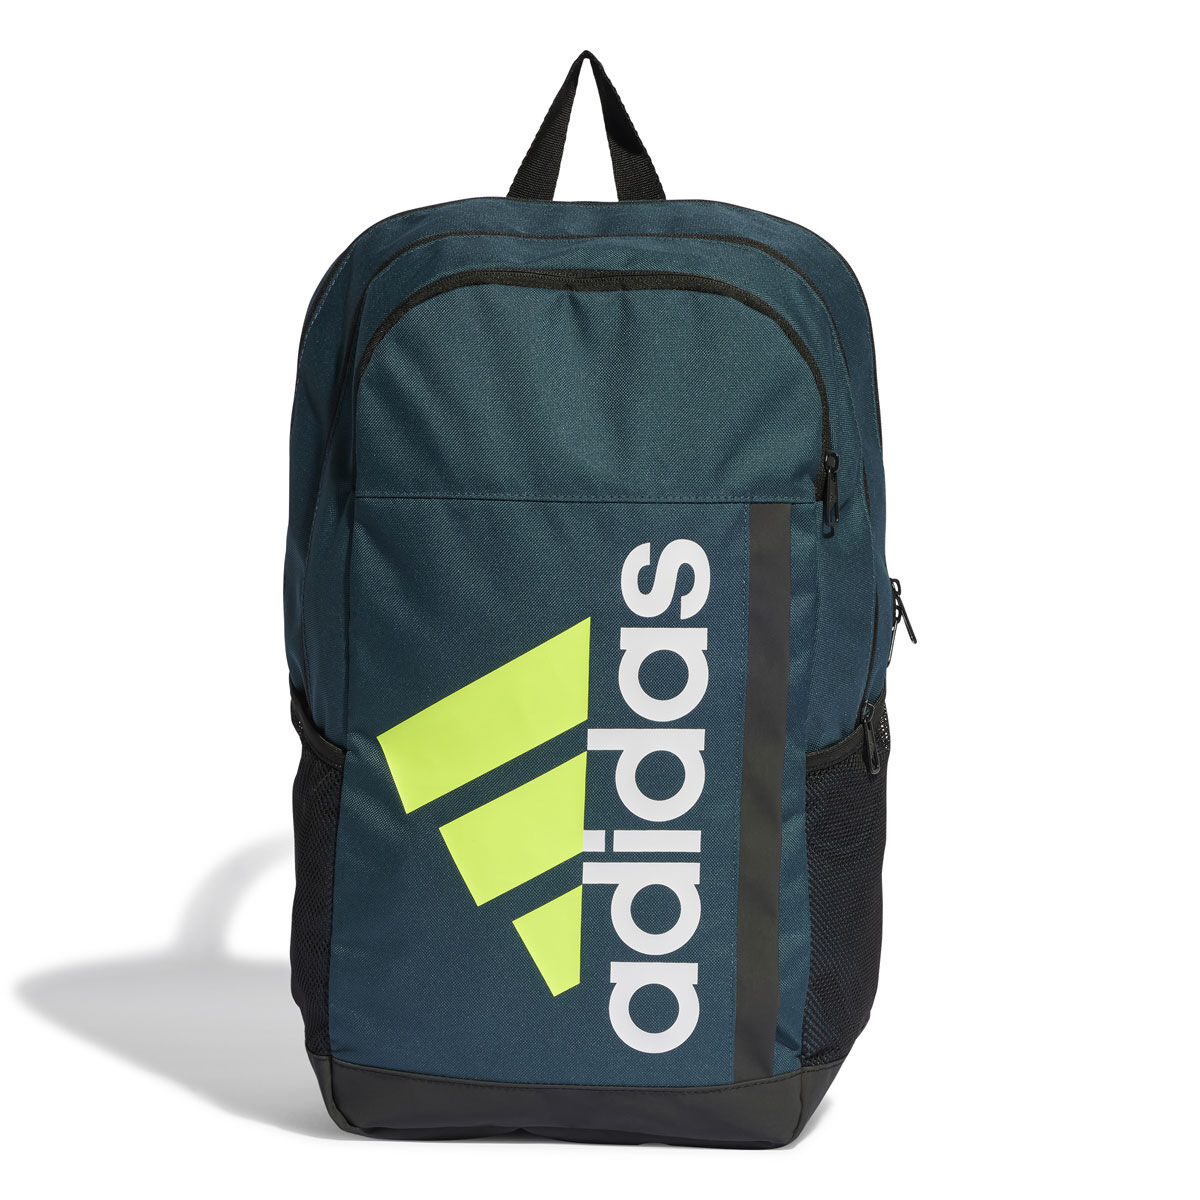 adidas Sports Bags Find adidas Backpacks Bum Bags  Bags for Gym Stock  Offers  Arvind Sport yeezy frozen yellow restock 2018 colors chart free